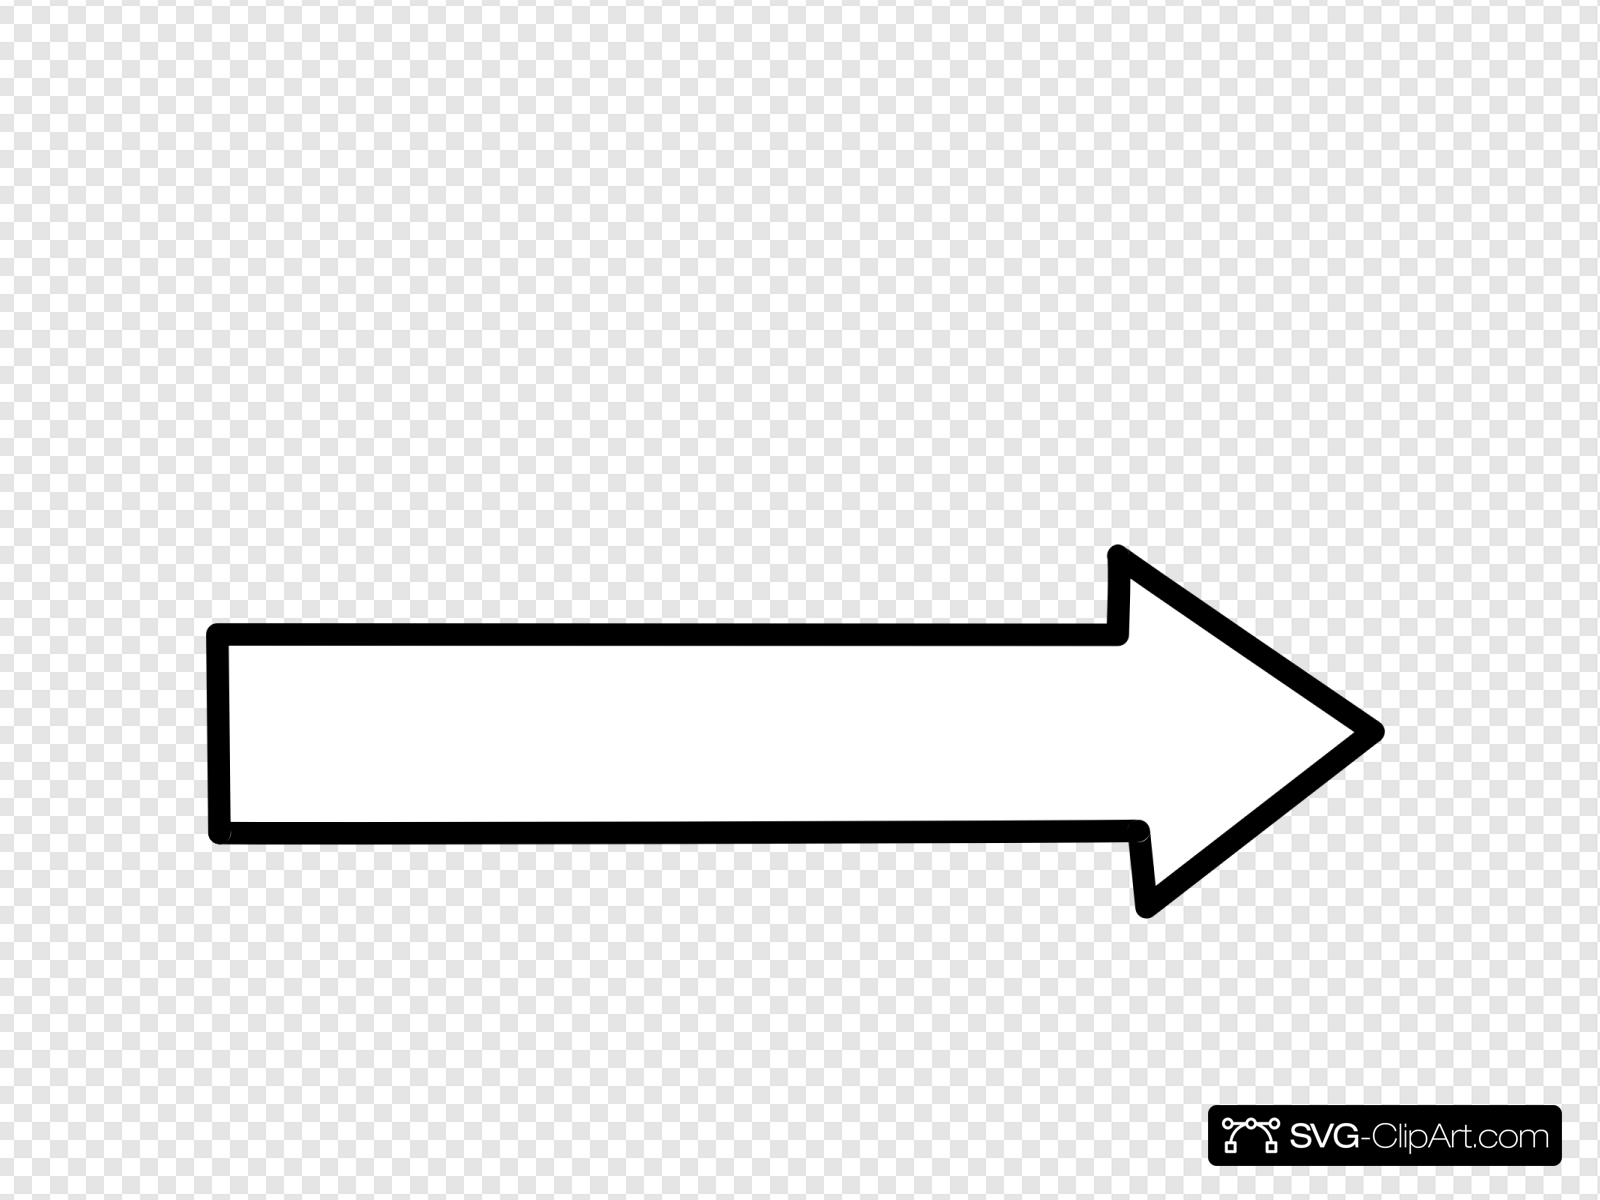 arrow clipart black and white right